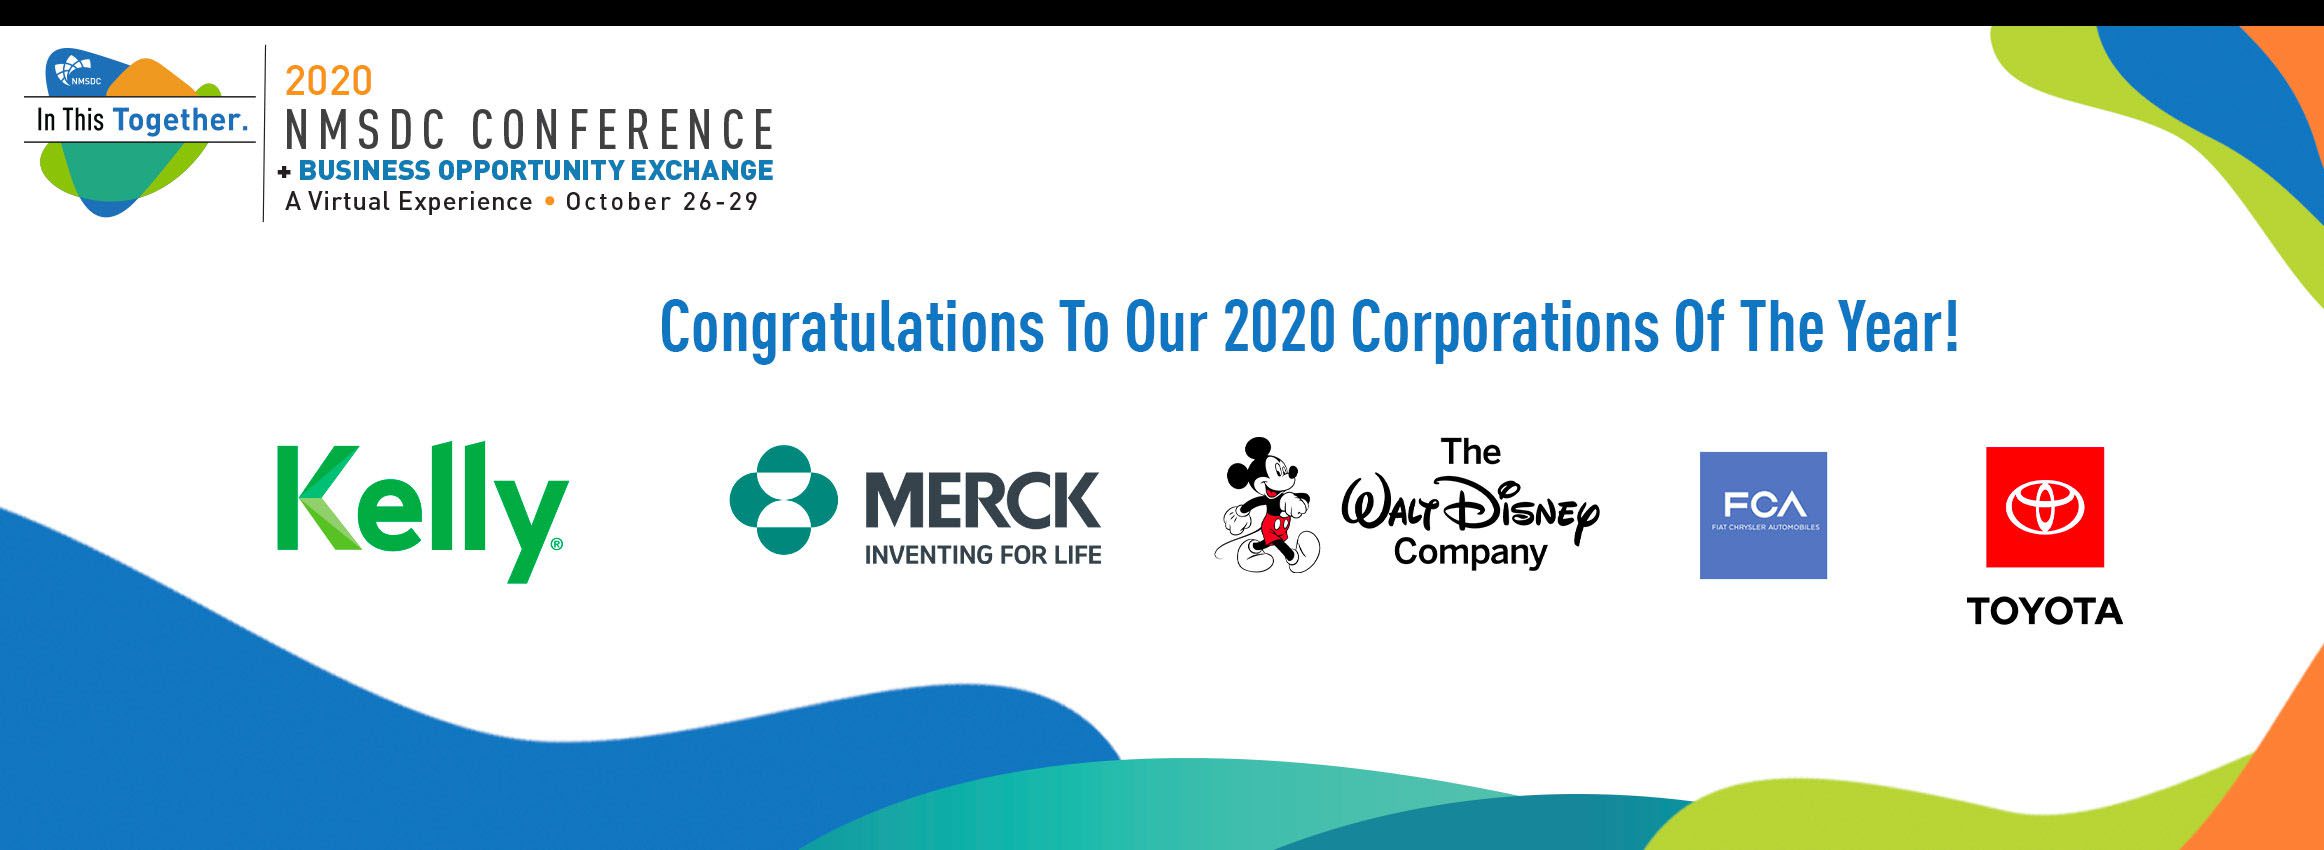 NMSDC 2020 Corporations Of The Year 